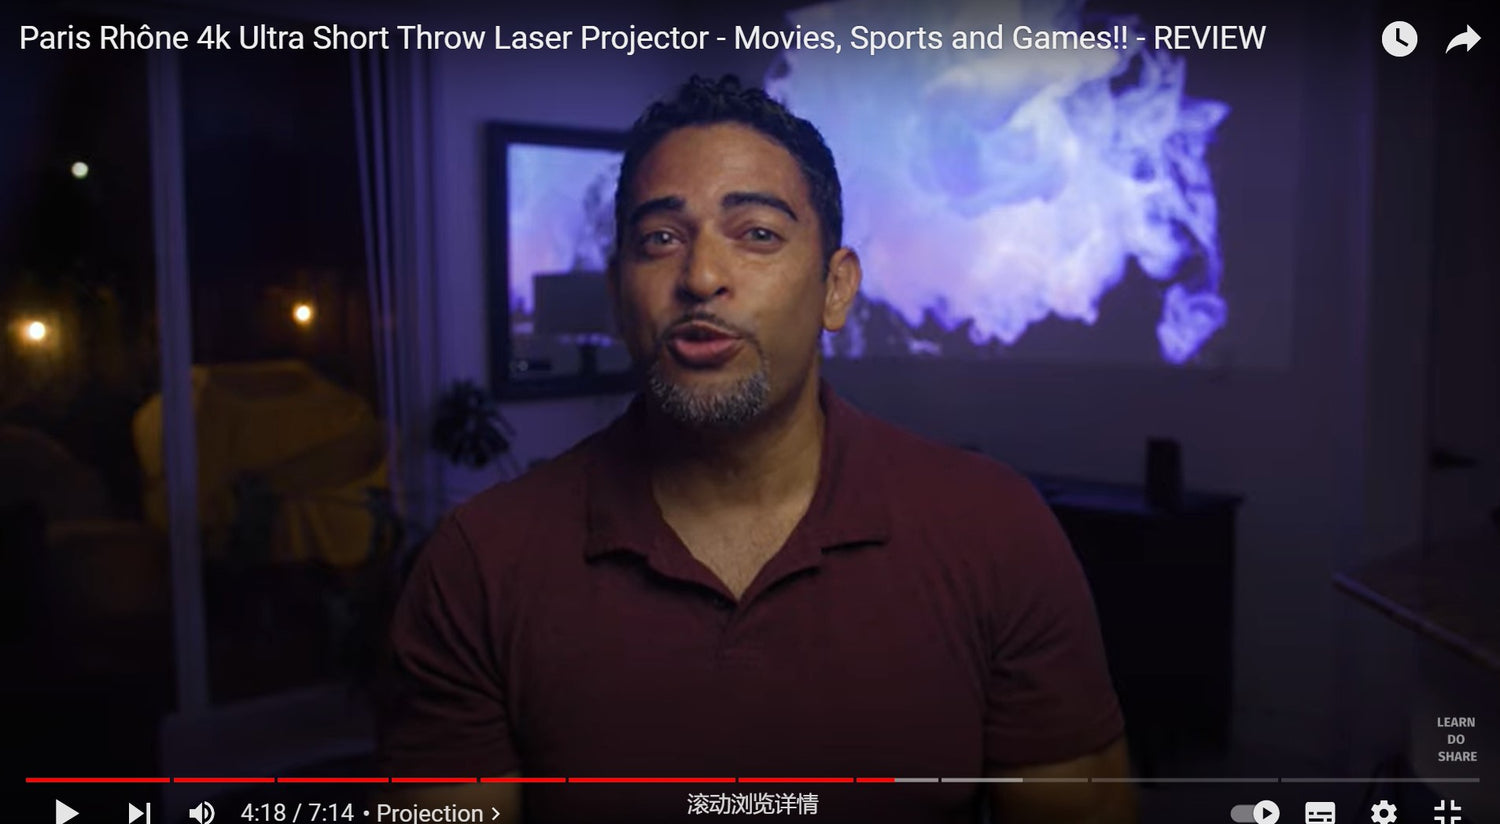 Paris Rhône 4k Ultra Short Throw Laser Projector - Movies, Sports and Games!! - REVIEW